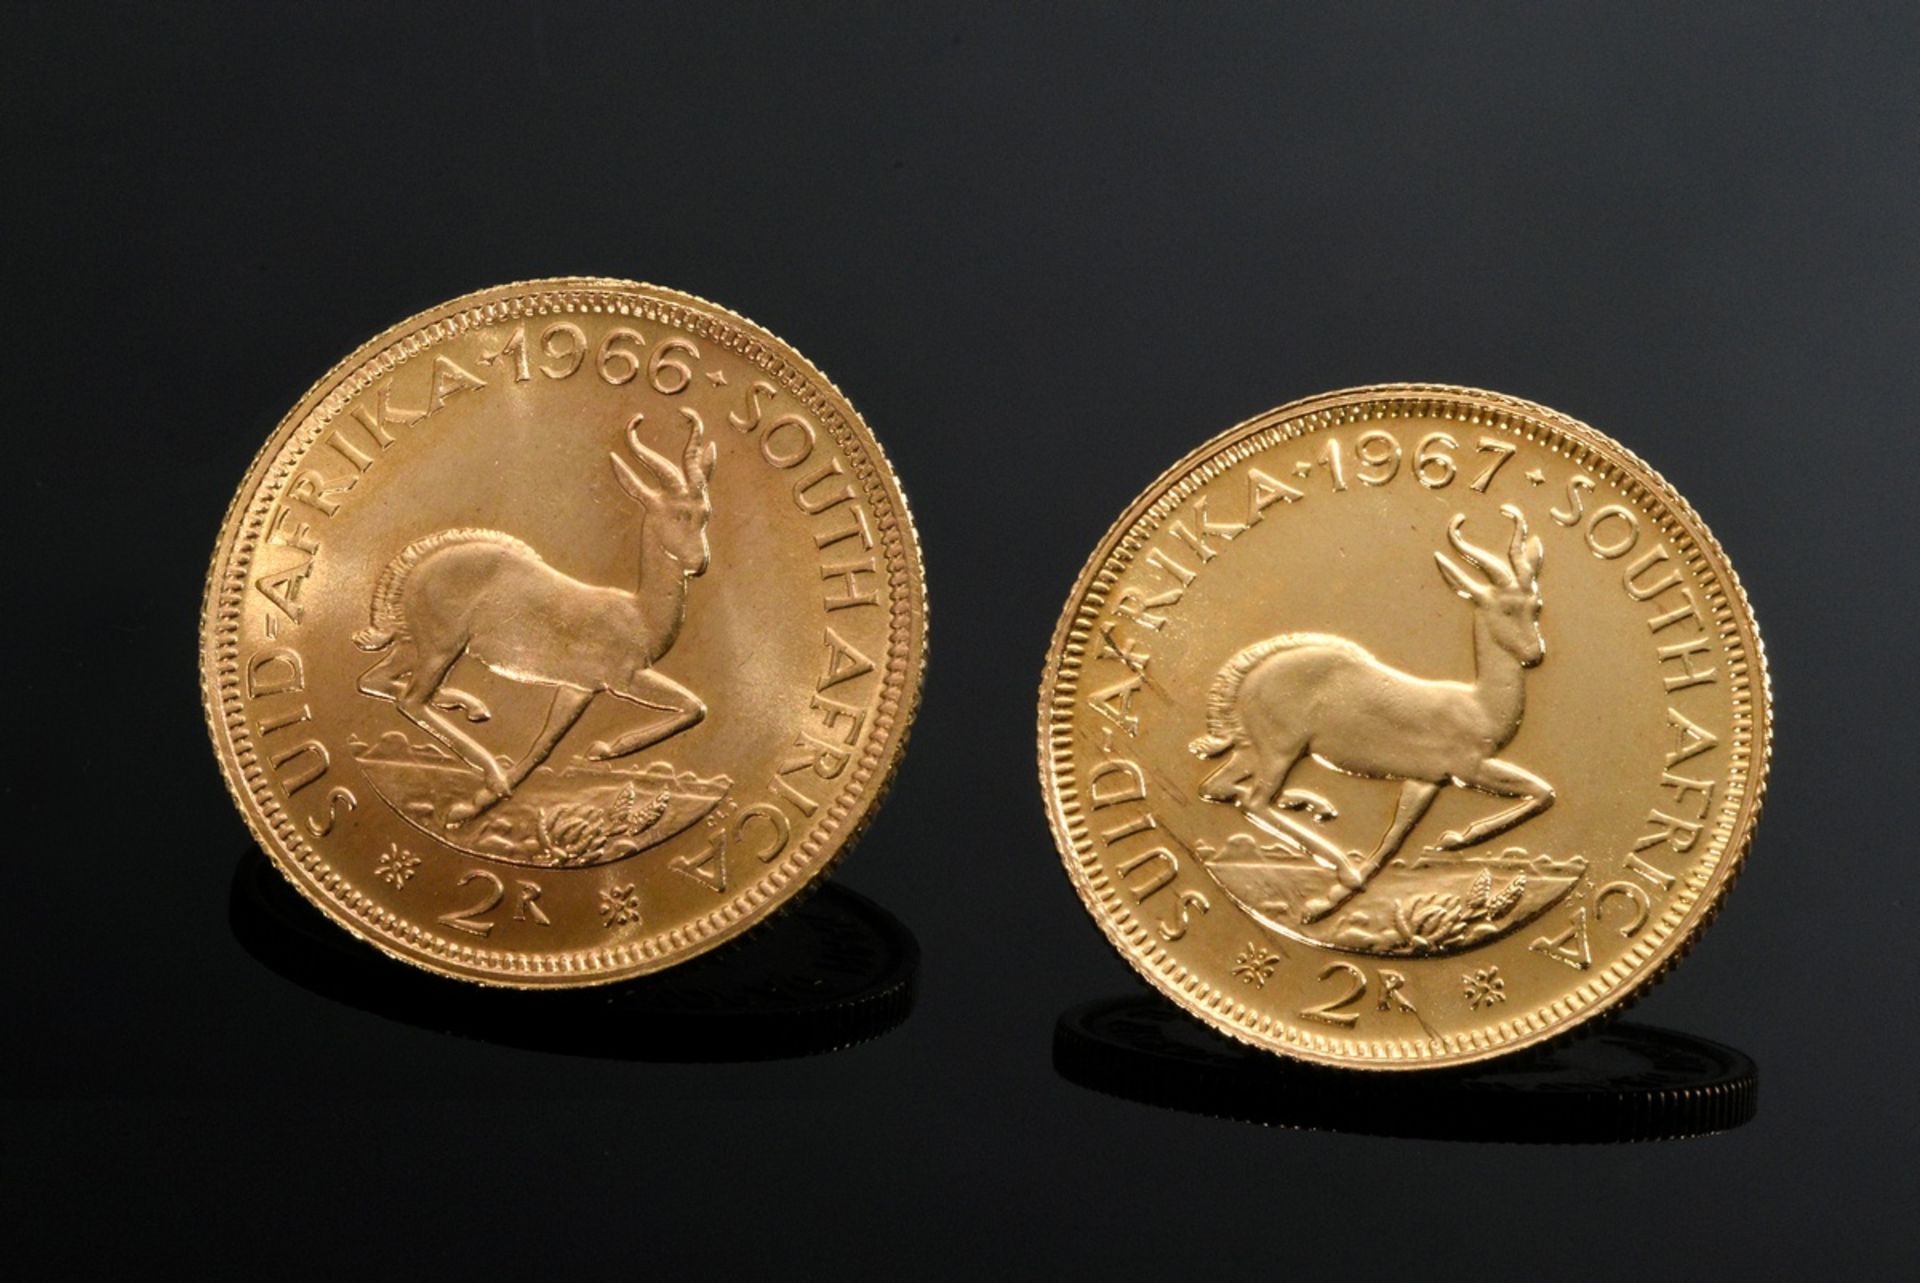 2 Yellow gold 916 "2 Rand Krugerrand" coins, 1966 and 1967, South Africa, total 16g, Ø 2.2cm